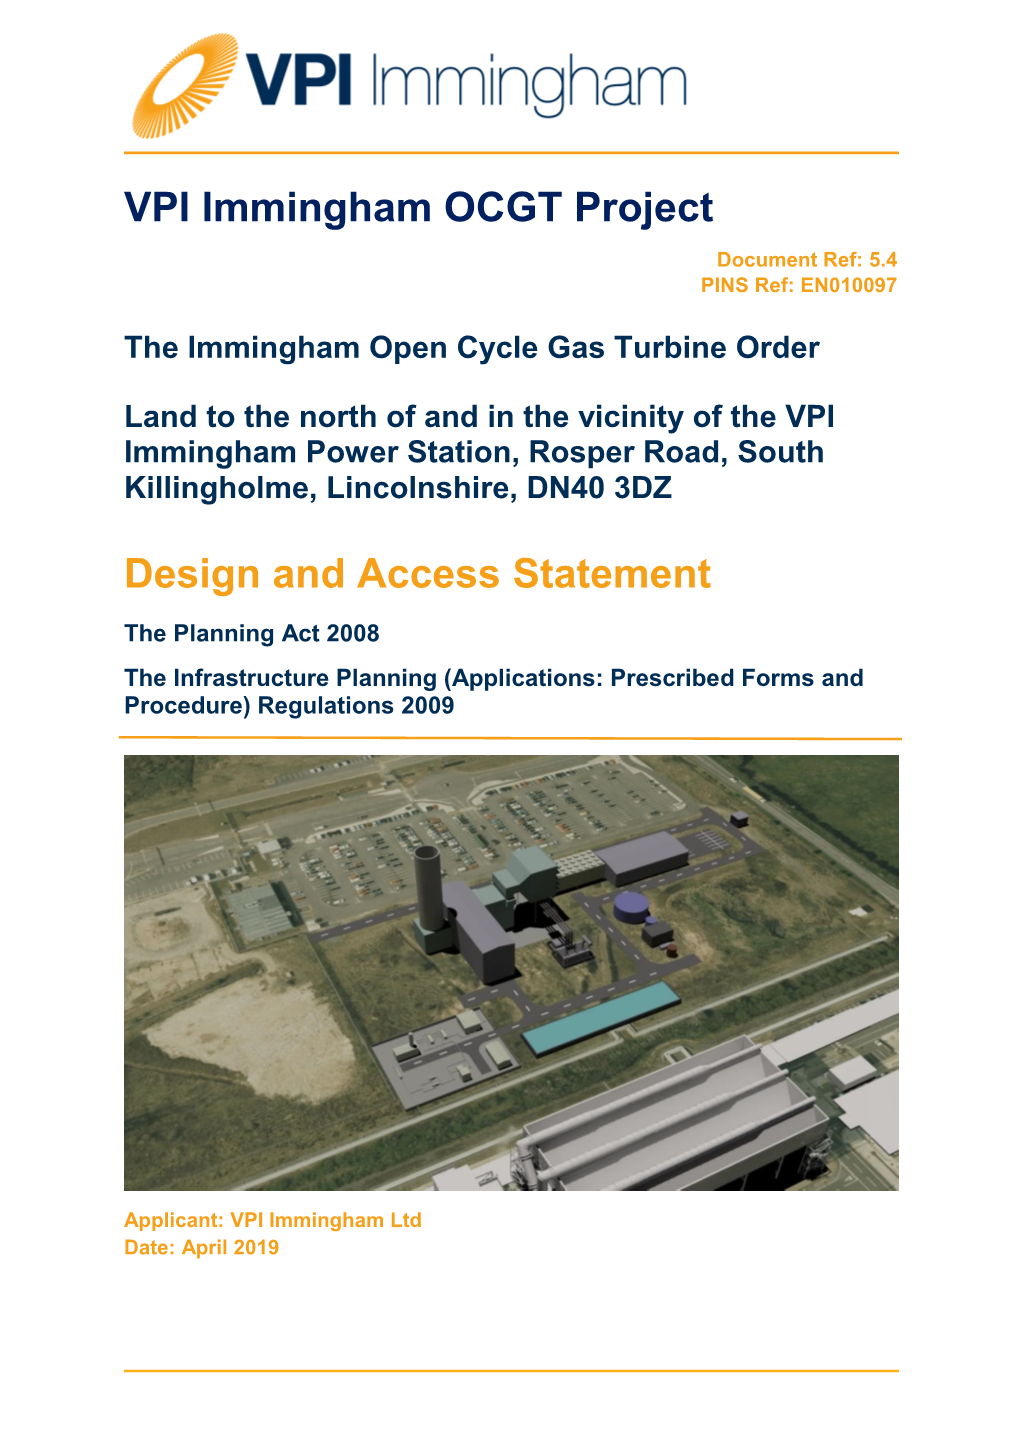 VPI Immingham OCGT Project Design and Access Statement